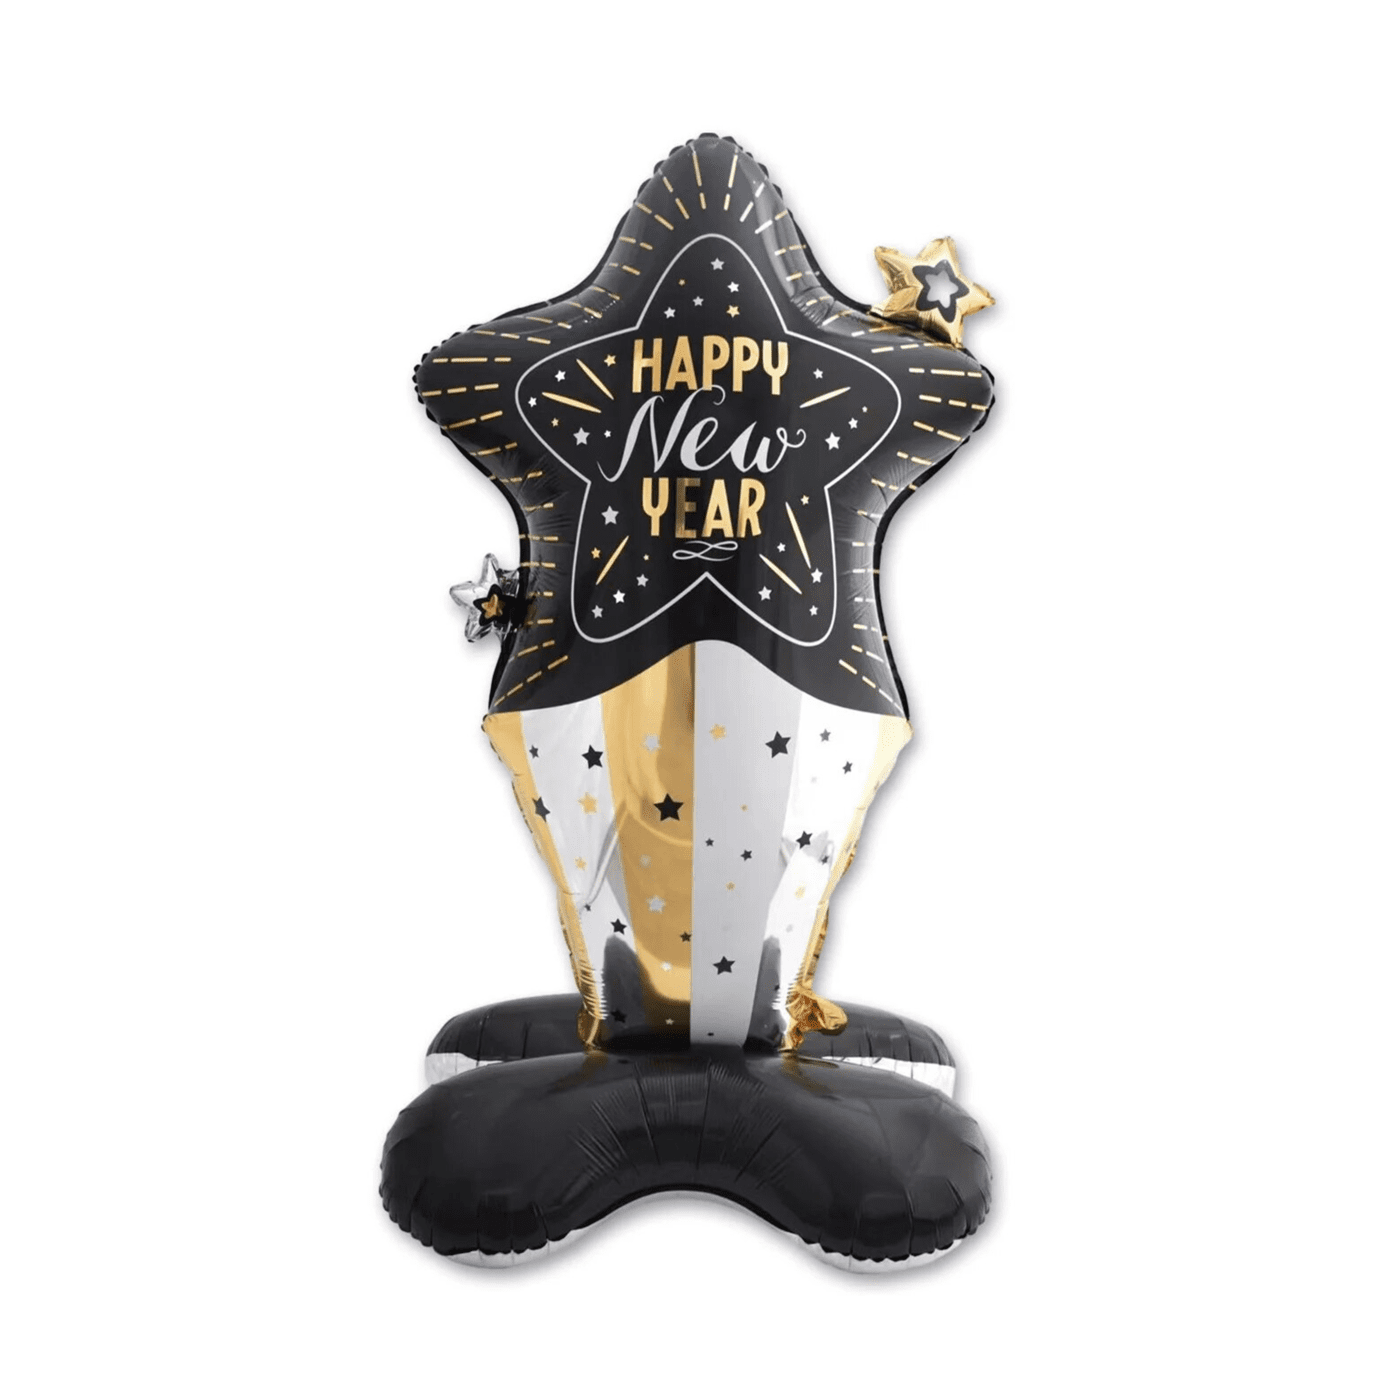 The Magic Balloons - 58-inch Happy New Year Foil Balloon for New Year Party Decoration Pack of 1pcs New Year Theme Foil Balloon for Home and Offices, New Year Party Supplier